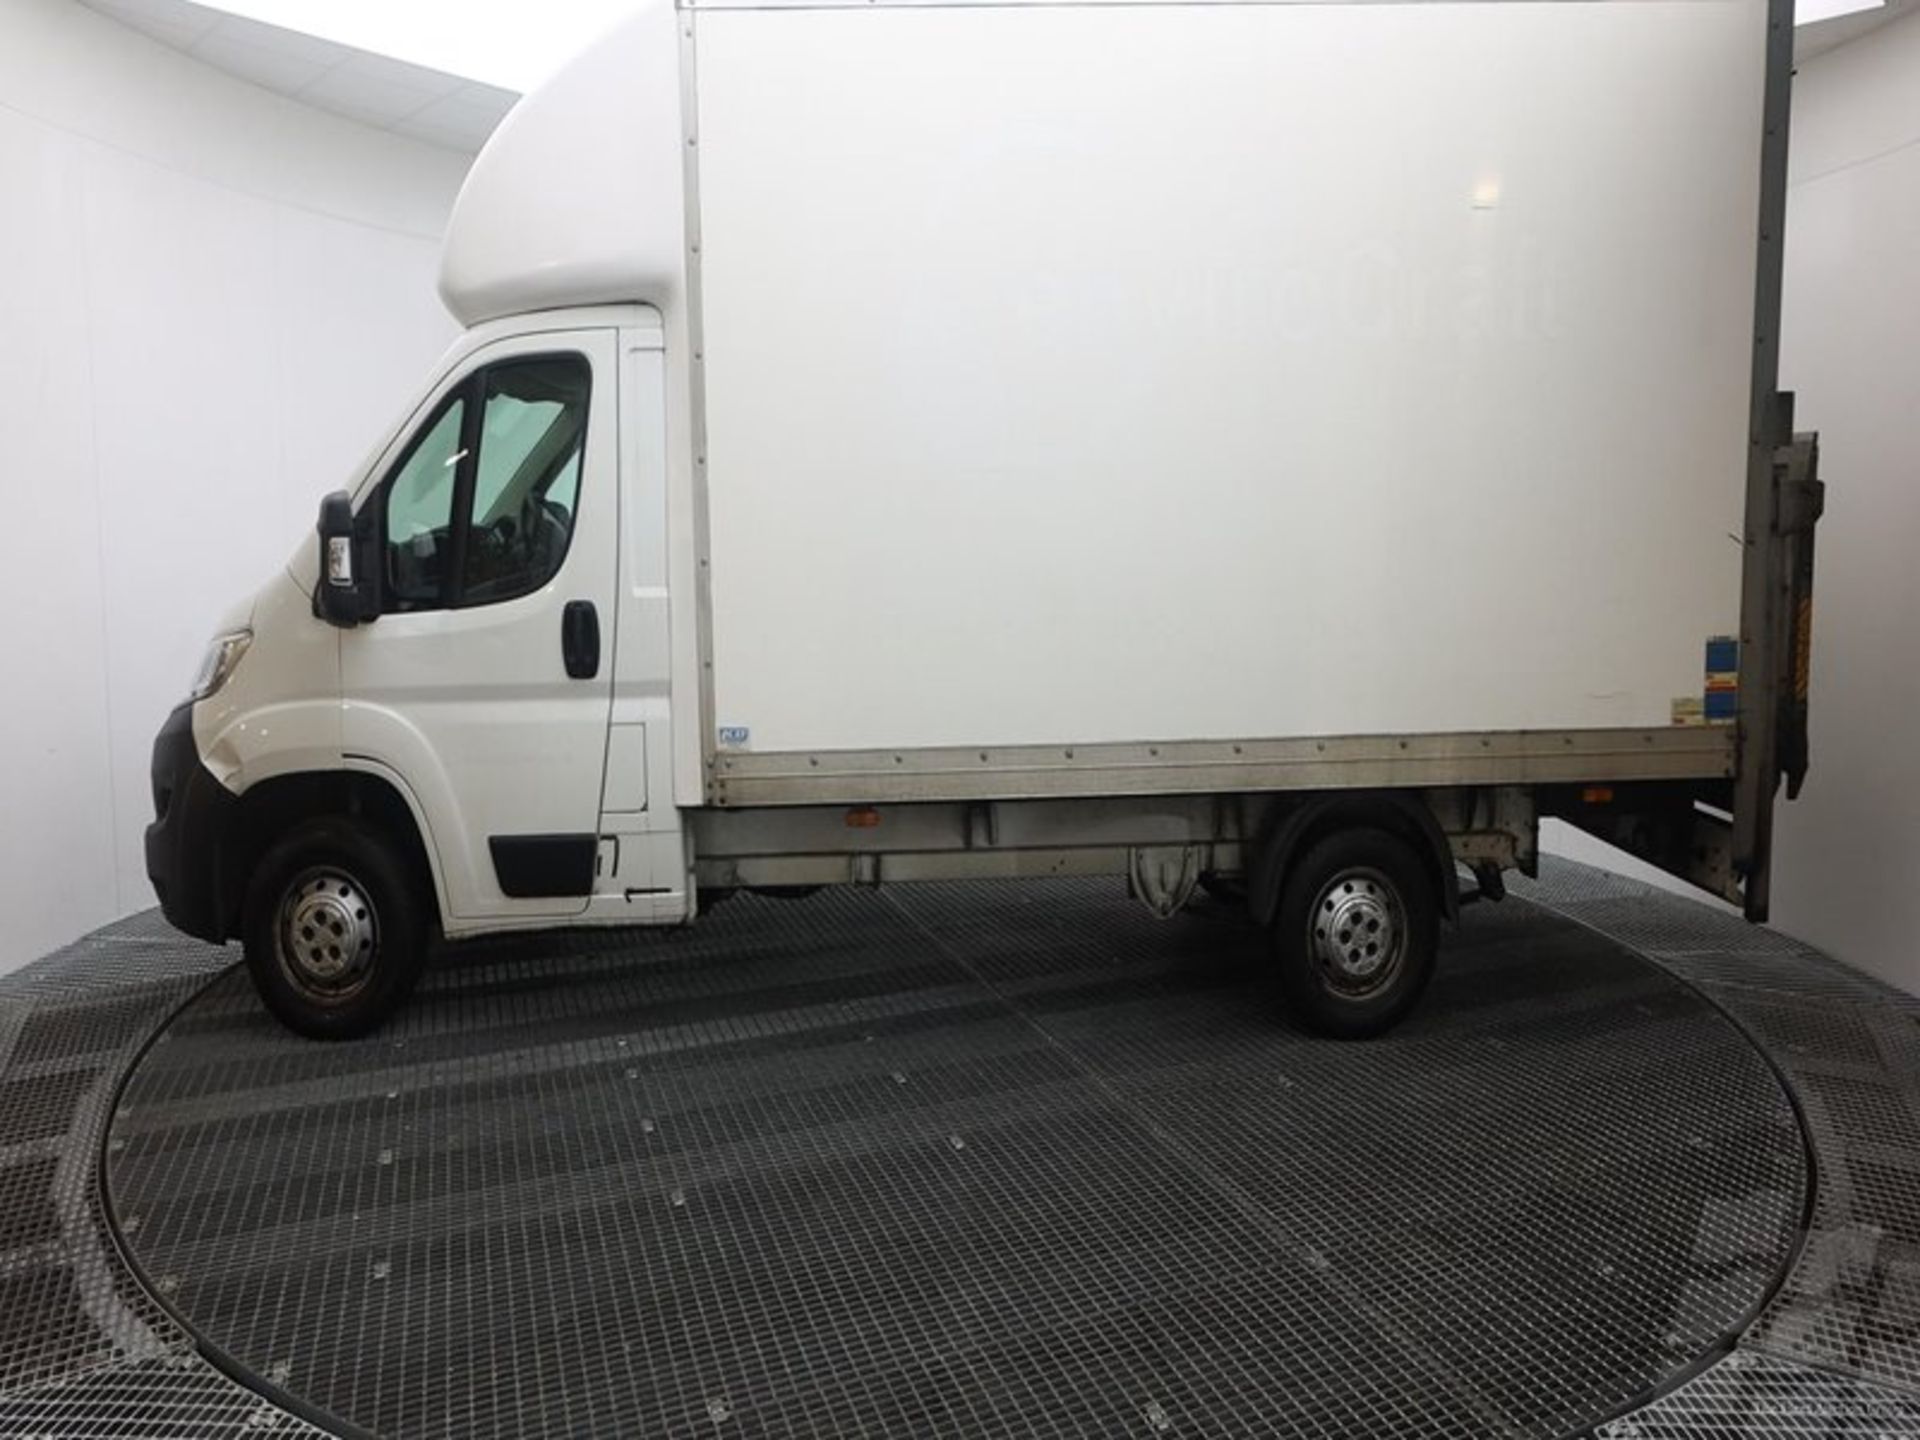 CITROEN RELAY 2.0HDI"160"LONG WHEEL BASE LUTON BOX VAN WITH ELECTRIC TAIL-LIFT -2020 MODEL -1 OWNER - Image 7 of 10